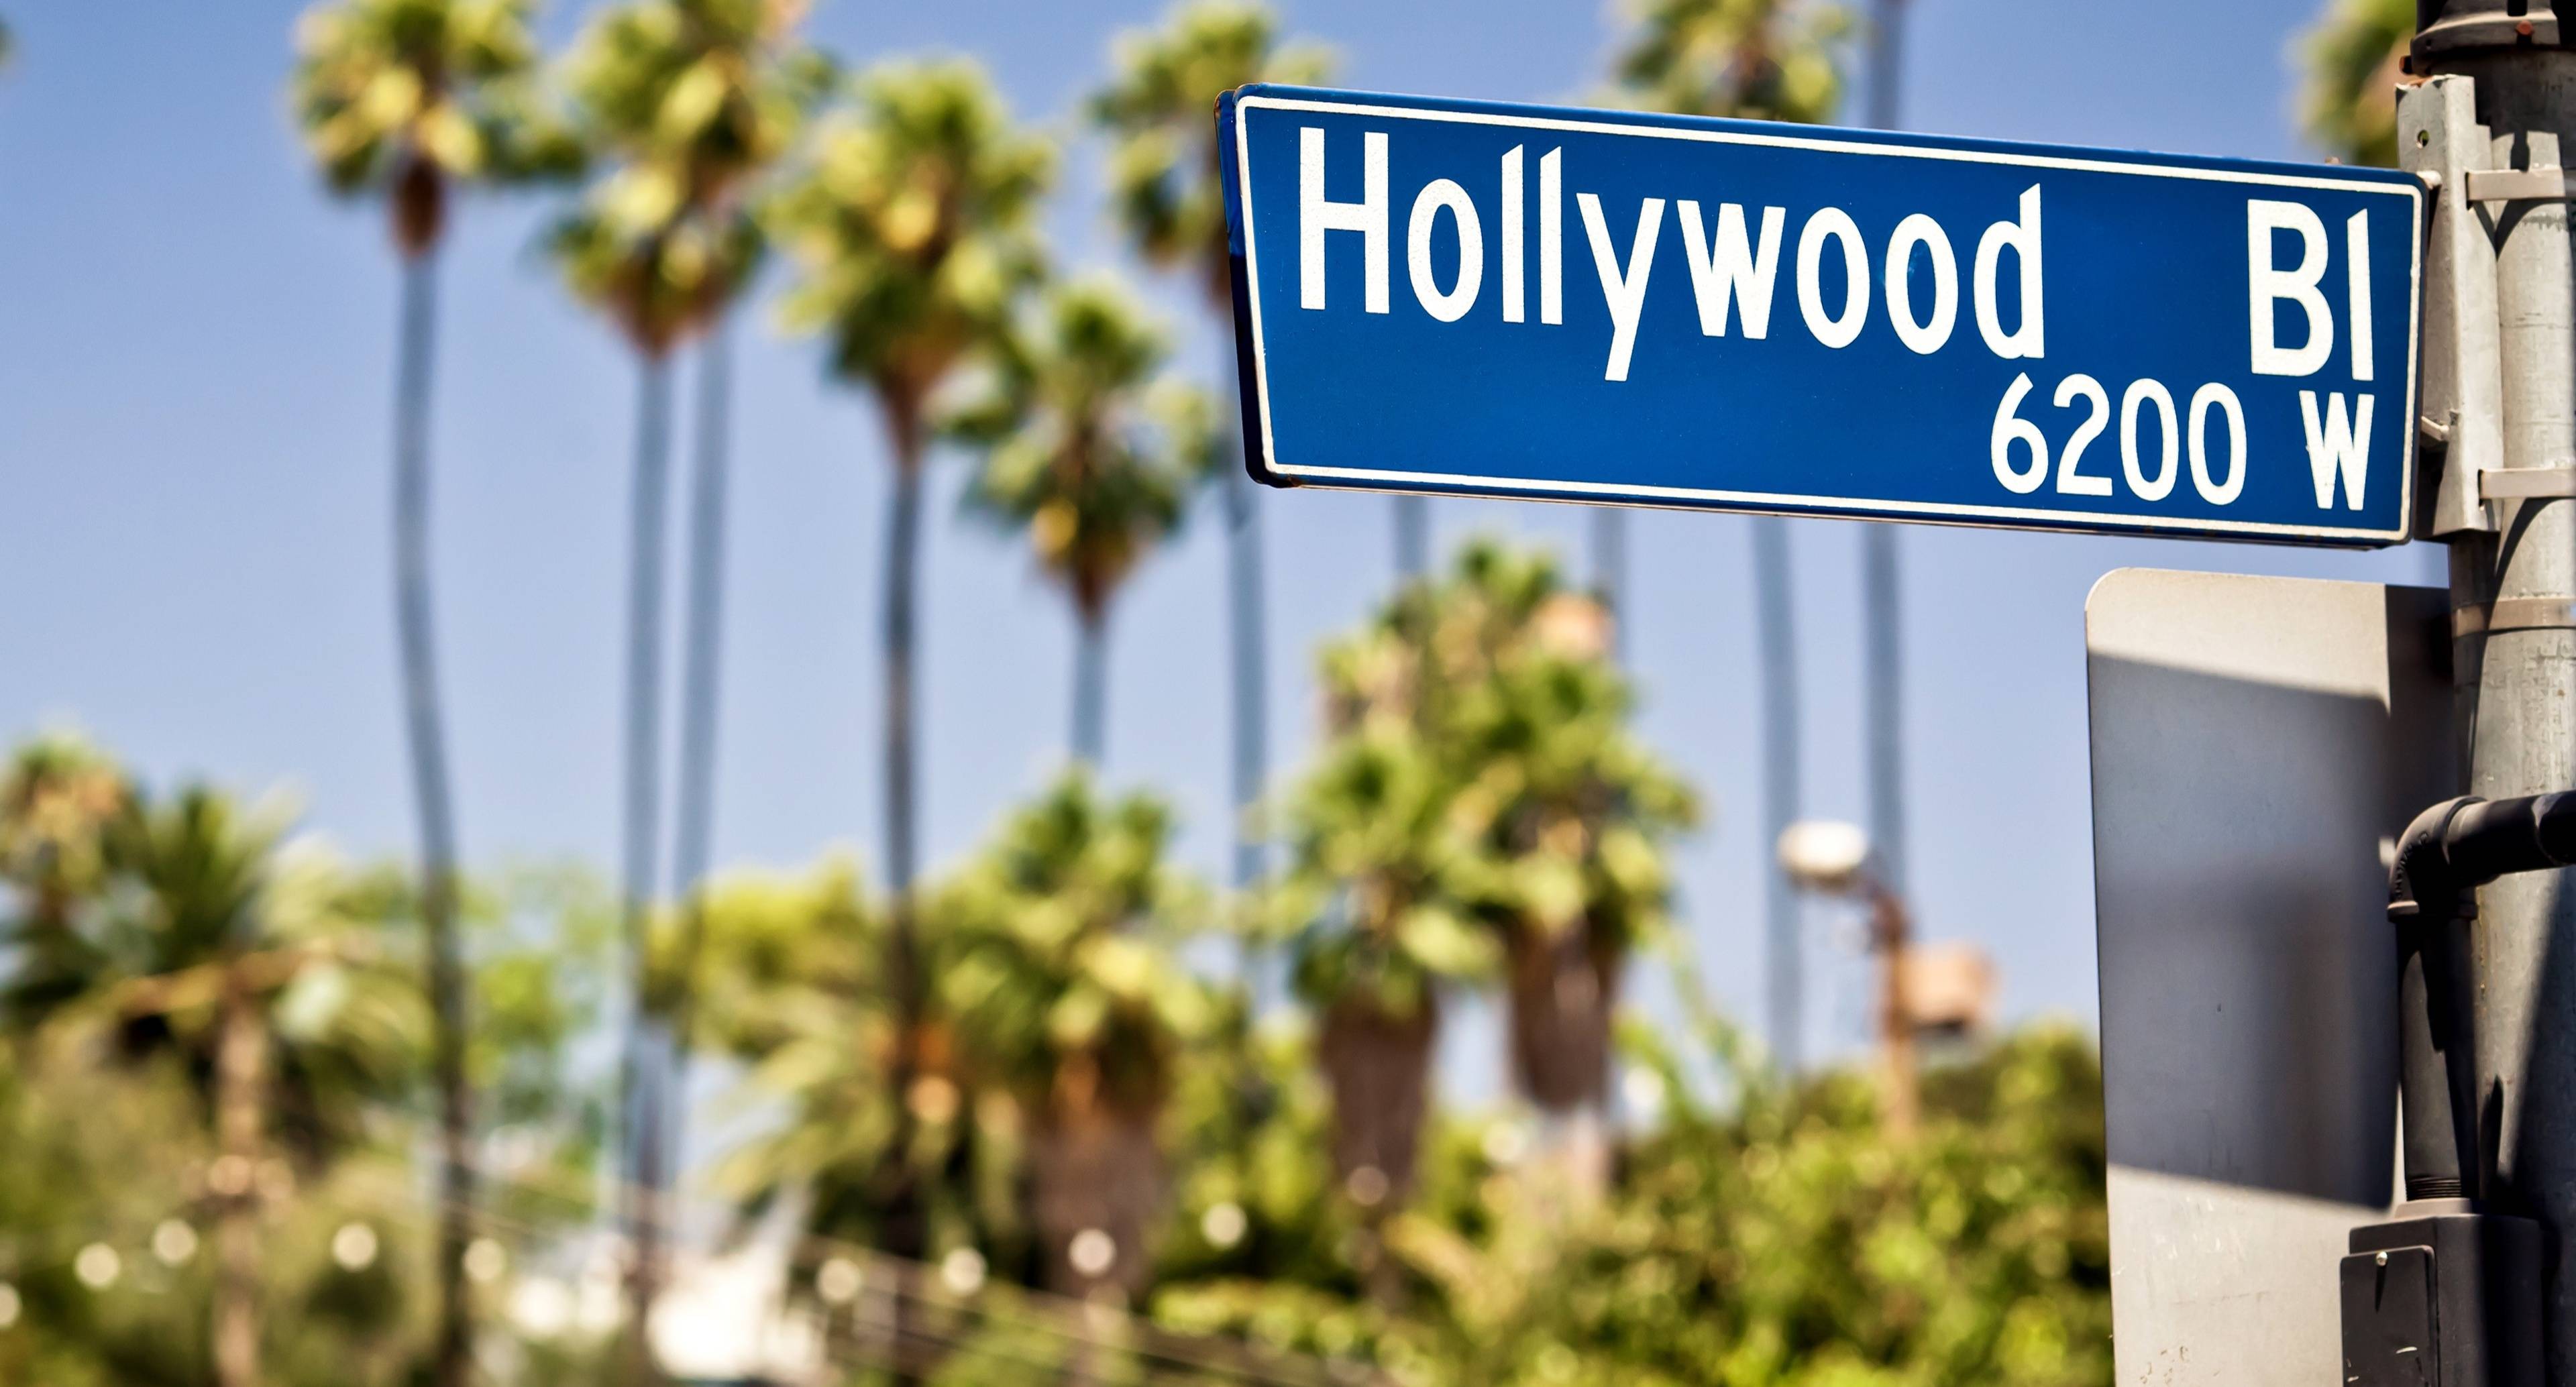 The Best of Hollywood and Santa Monica